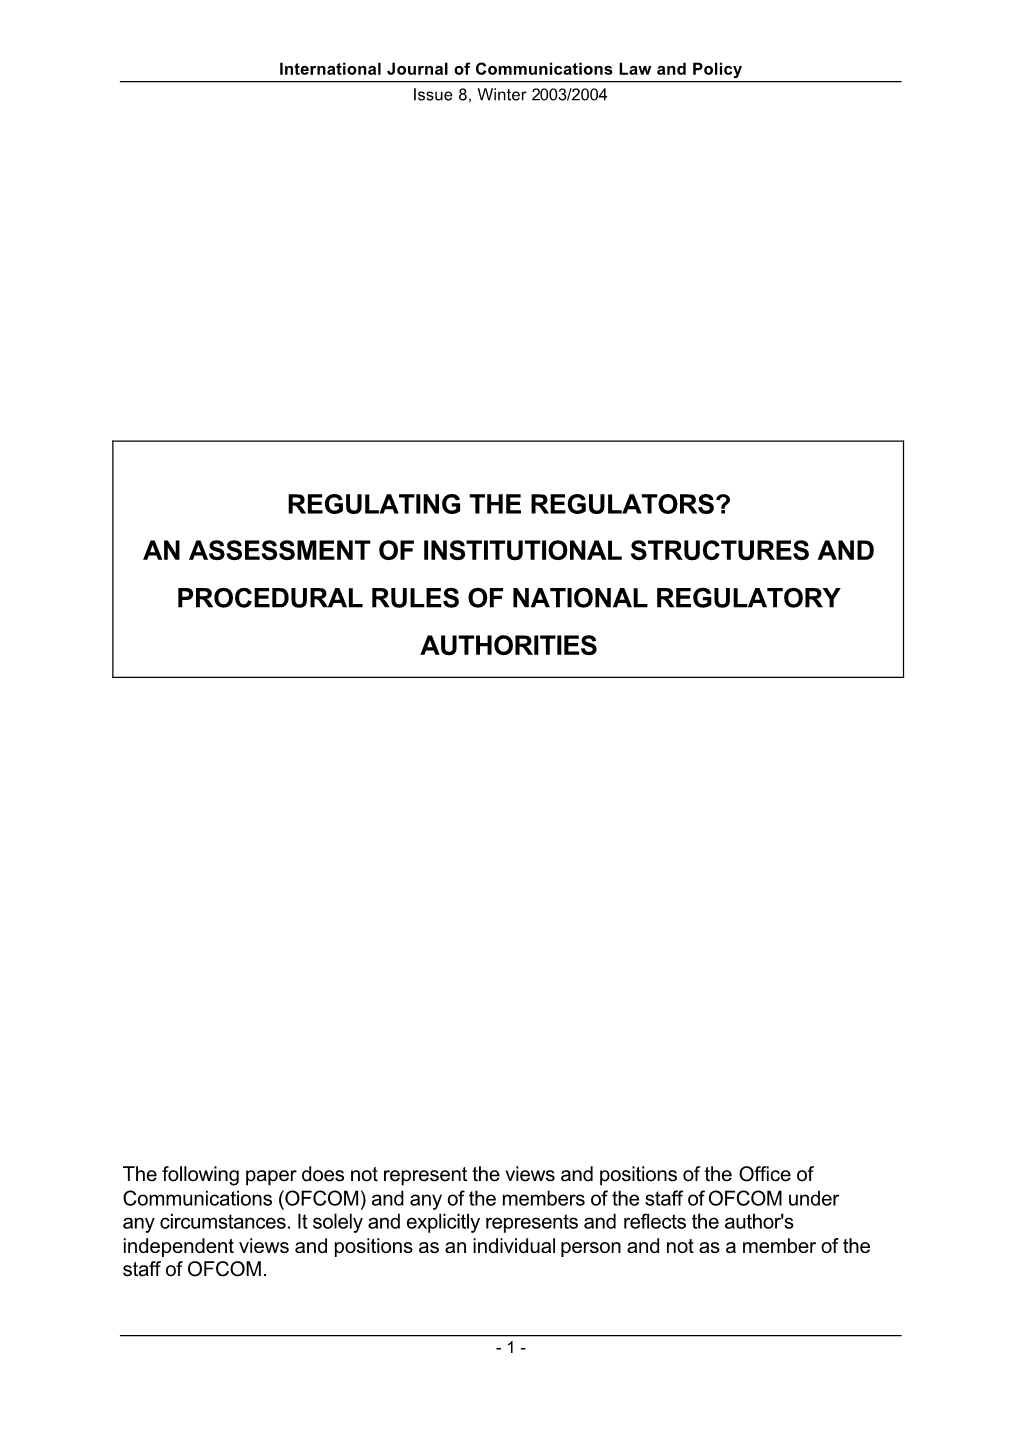 An Assessment of Institutional Structures and Procedural Rules of National Regulatory Authorities